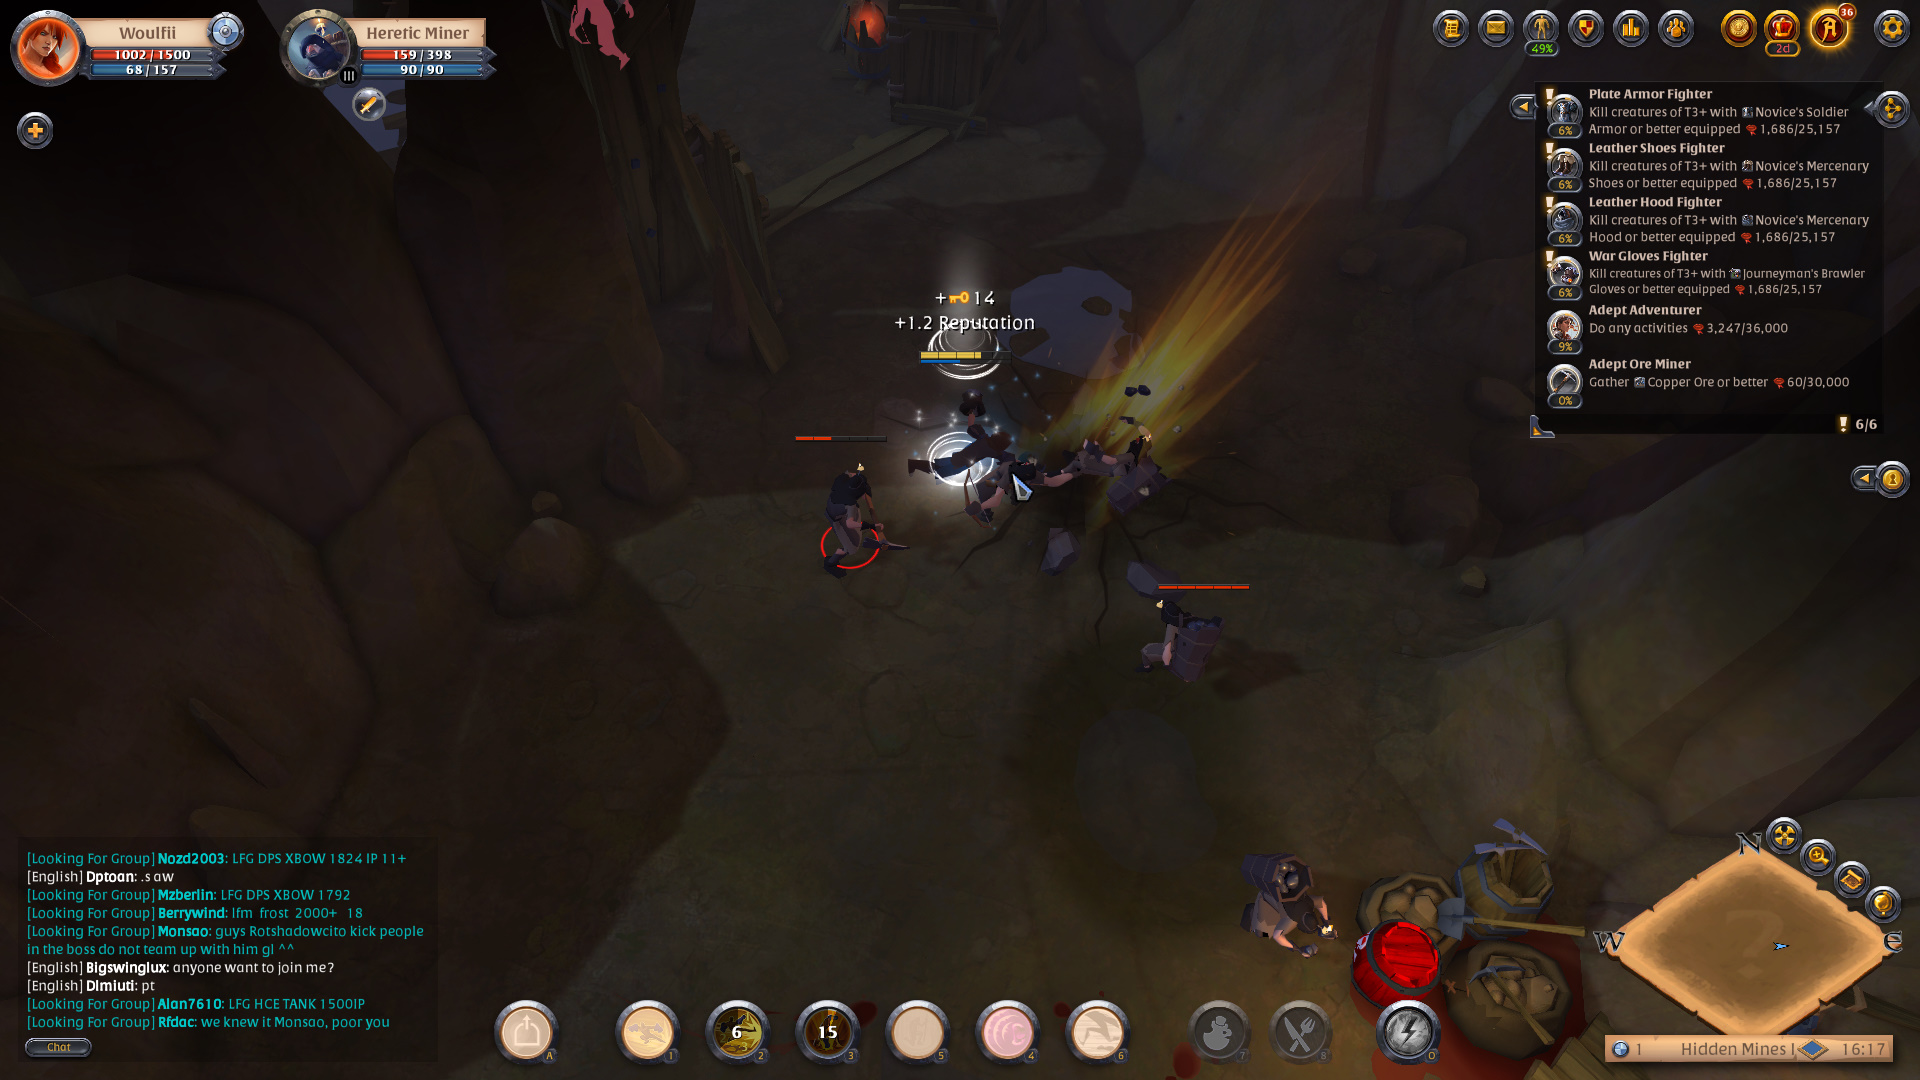 Albion Online Mobile review: Experience a classic old school